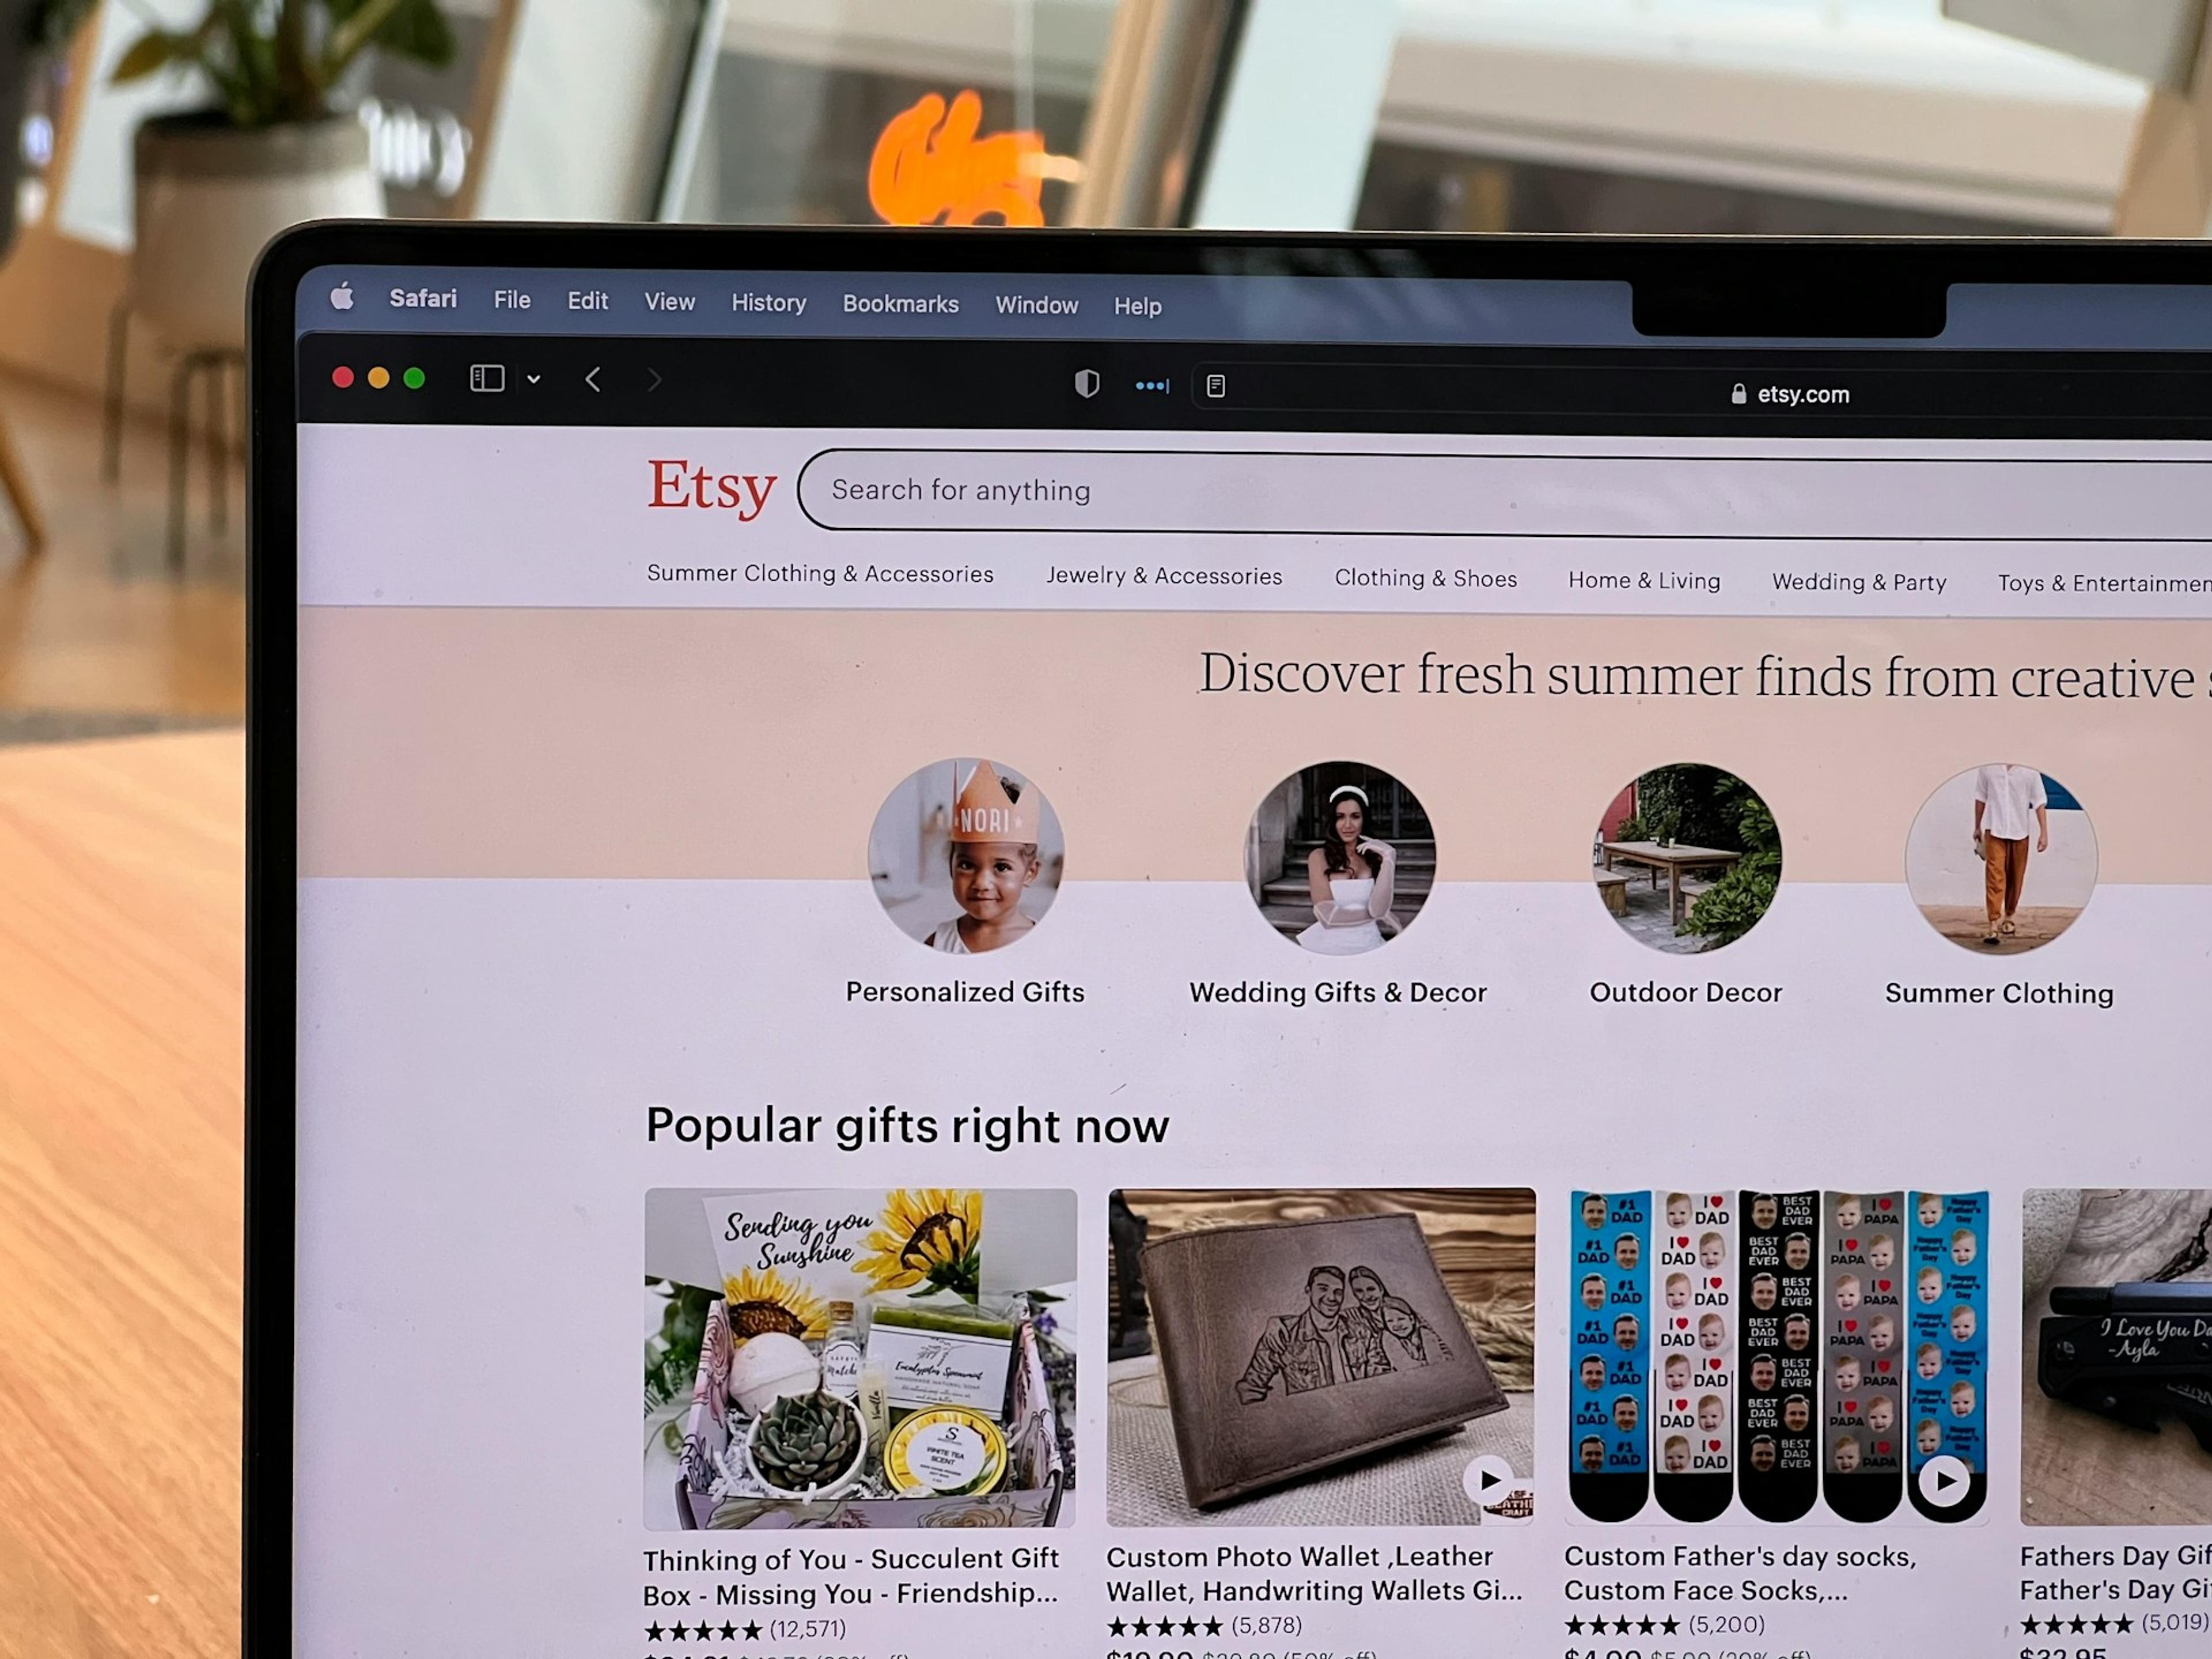 A picture of a laptop's screen showing Etsy Marketplace in the browser.